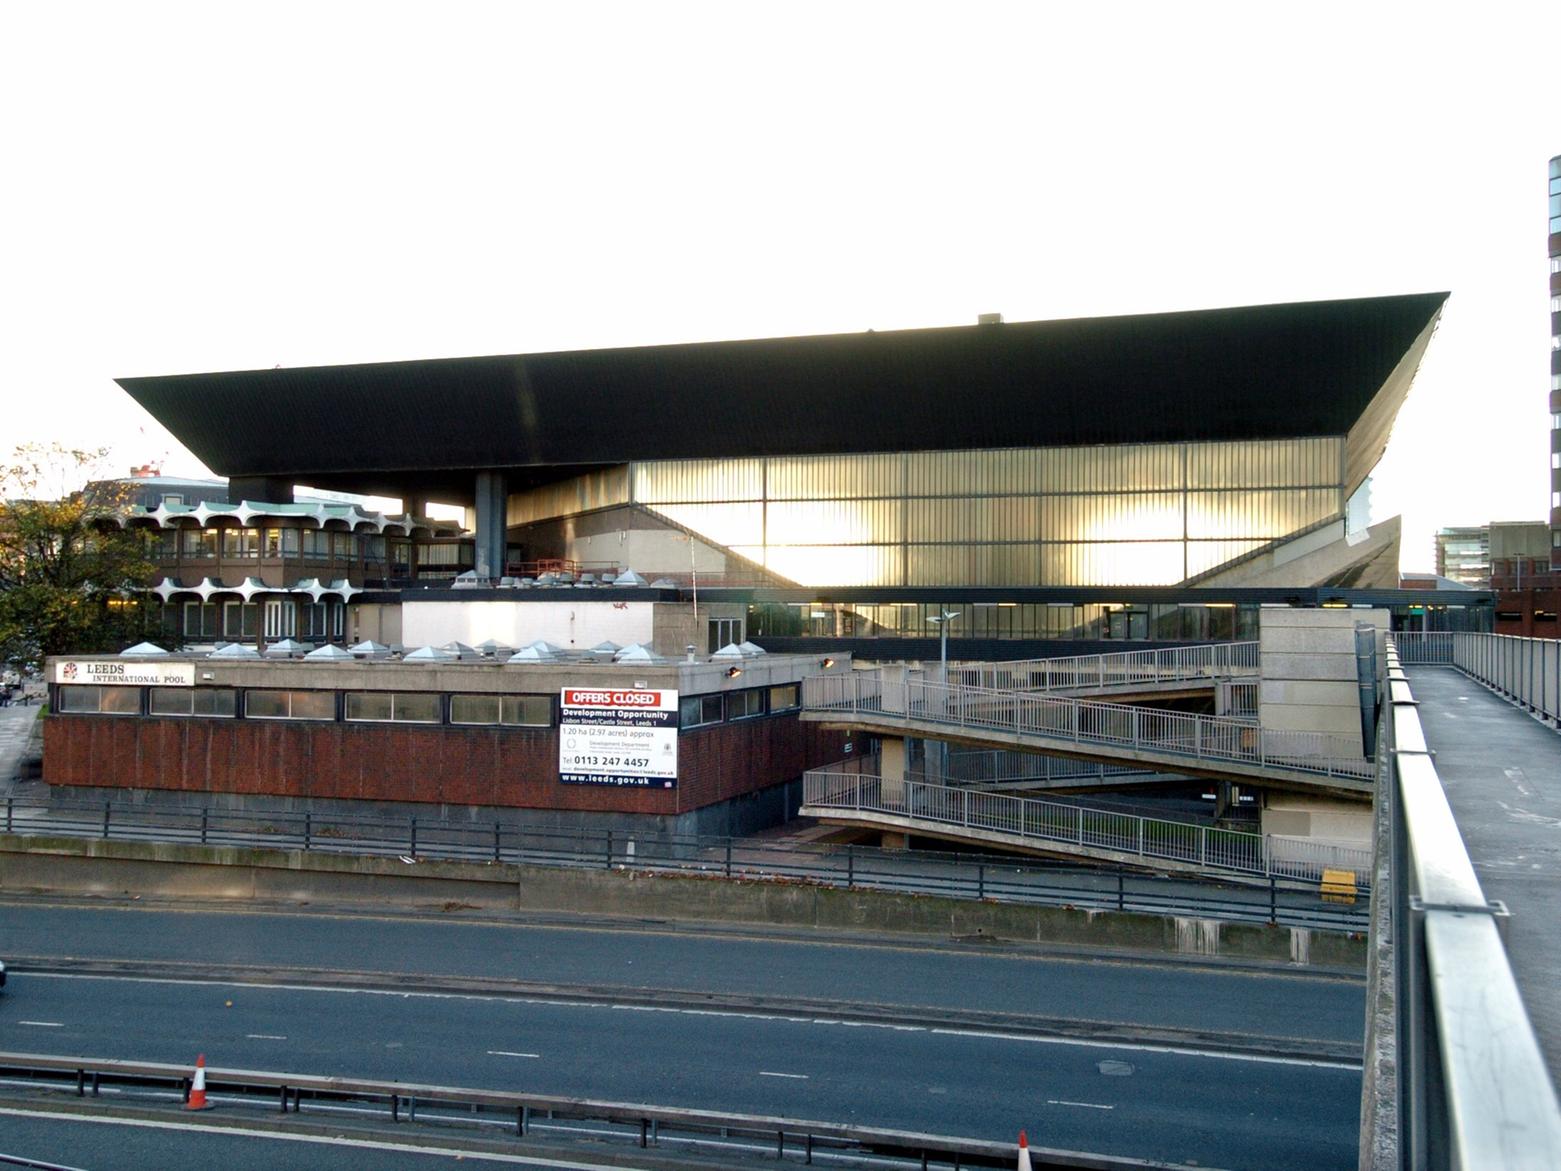 Located at the lower end of Westgate the pool was notable for its brutalist architecture. Demolished in 2009.